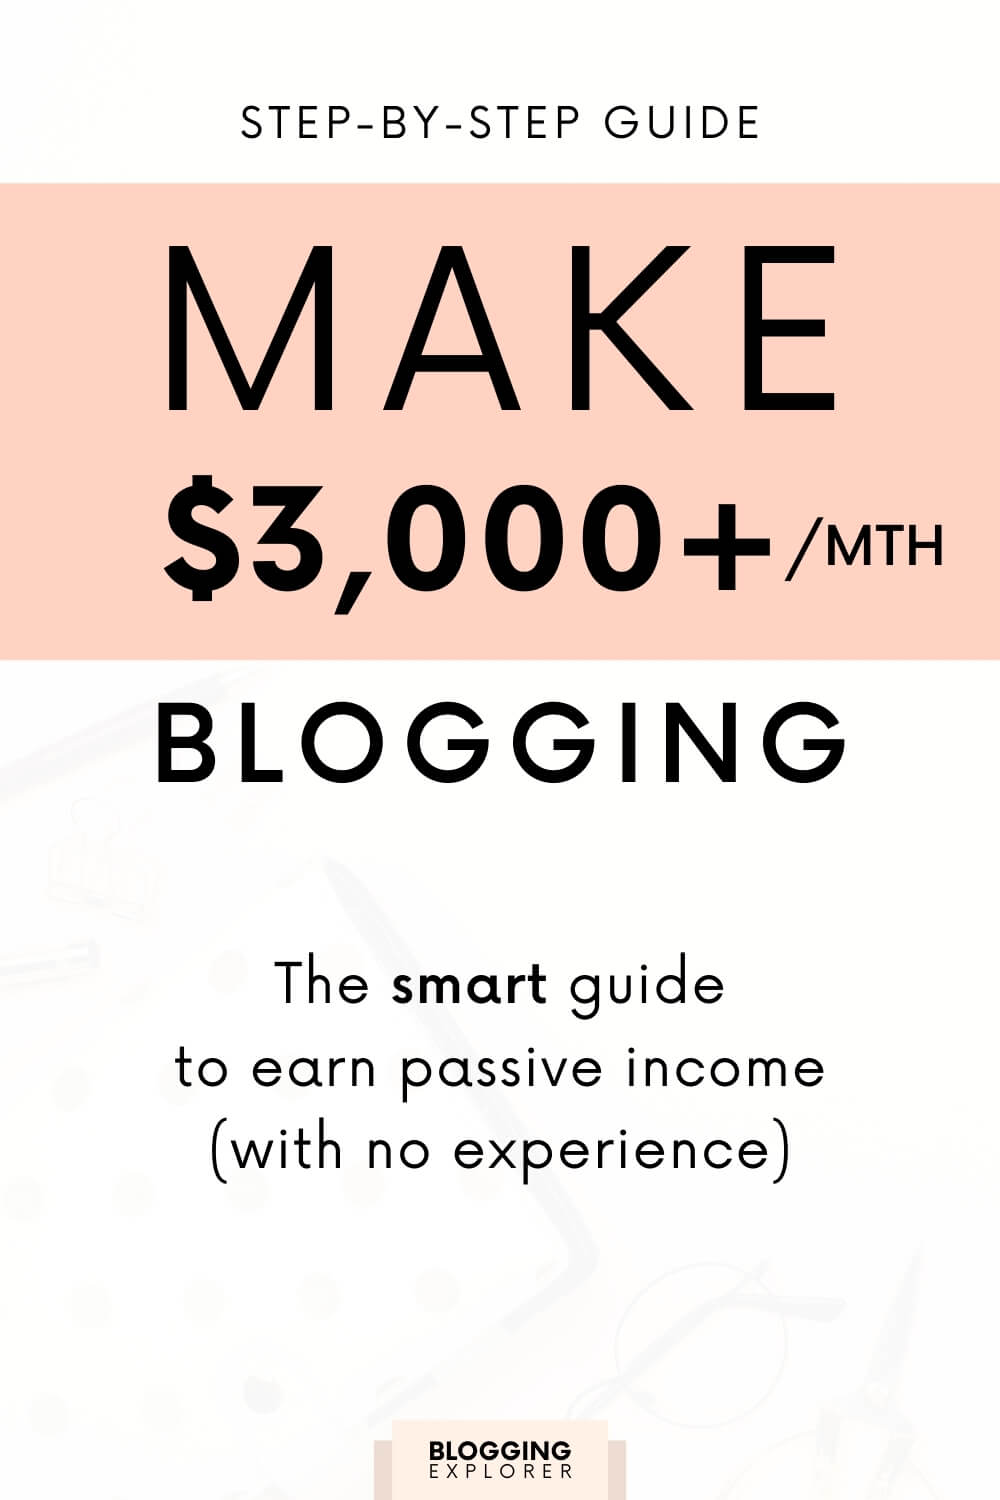 How to Make Money Blogging for Beginners (2022): Step-by-Step Guide